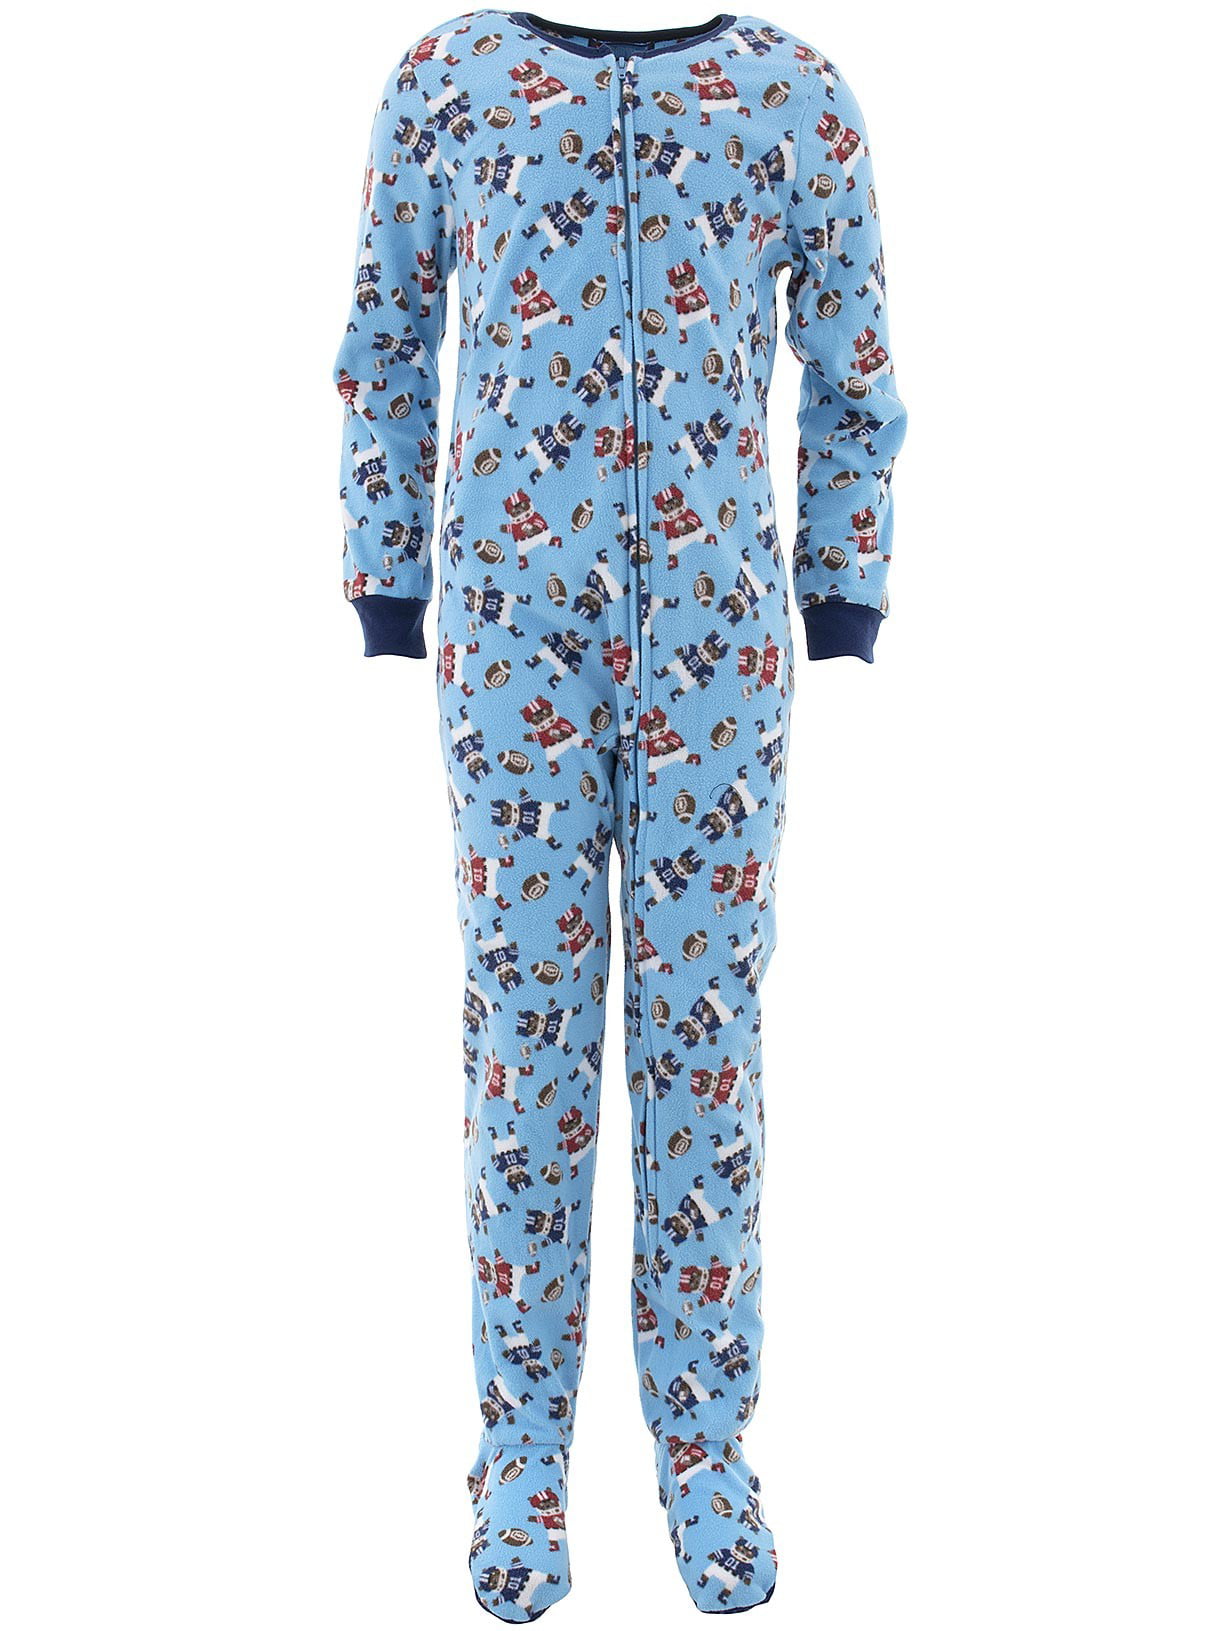 Only Boys - Only Boys Football Bears Blue Footed Pajamas L/12-14 ...